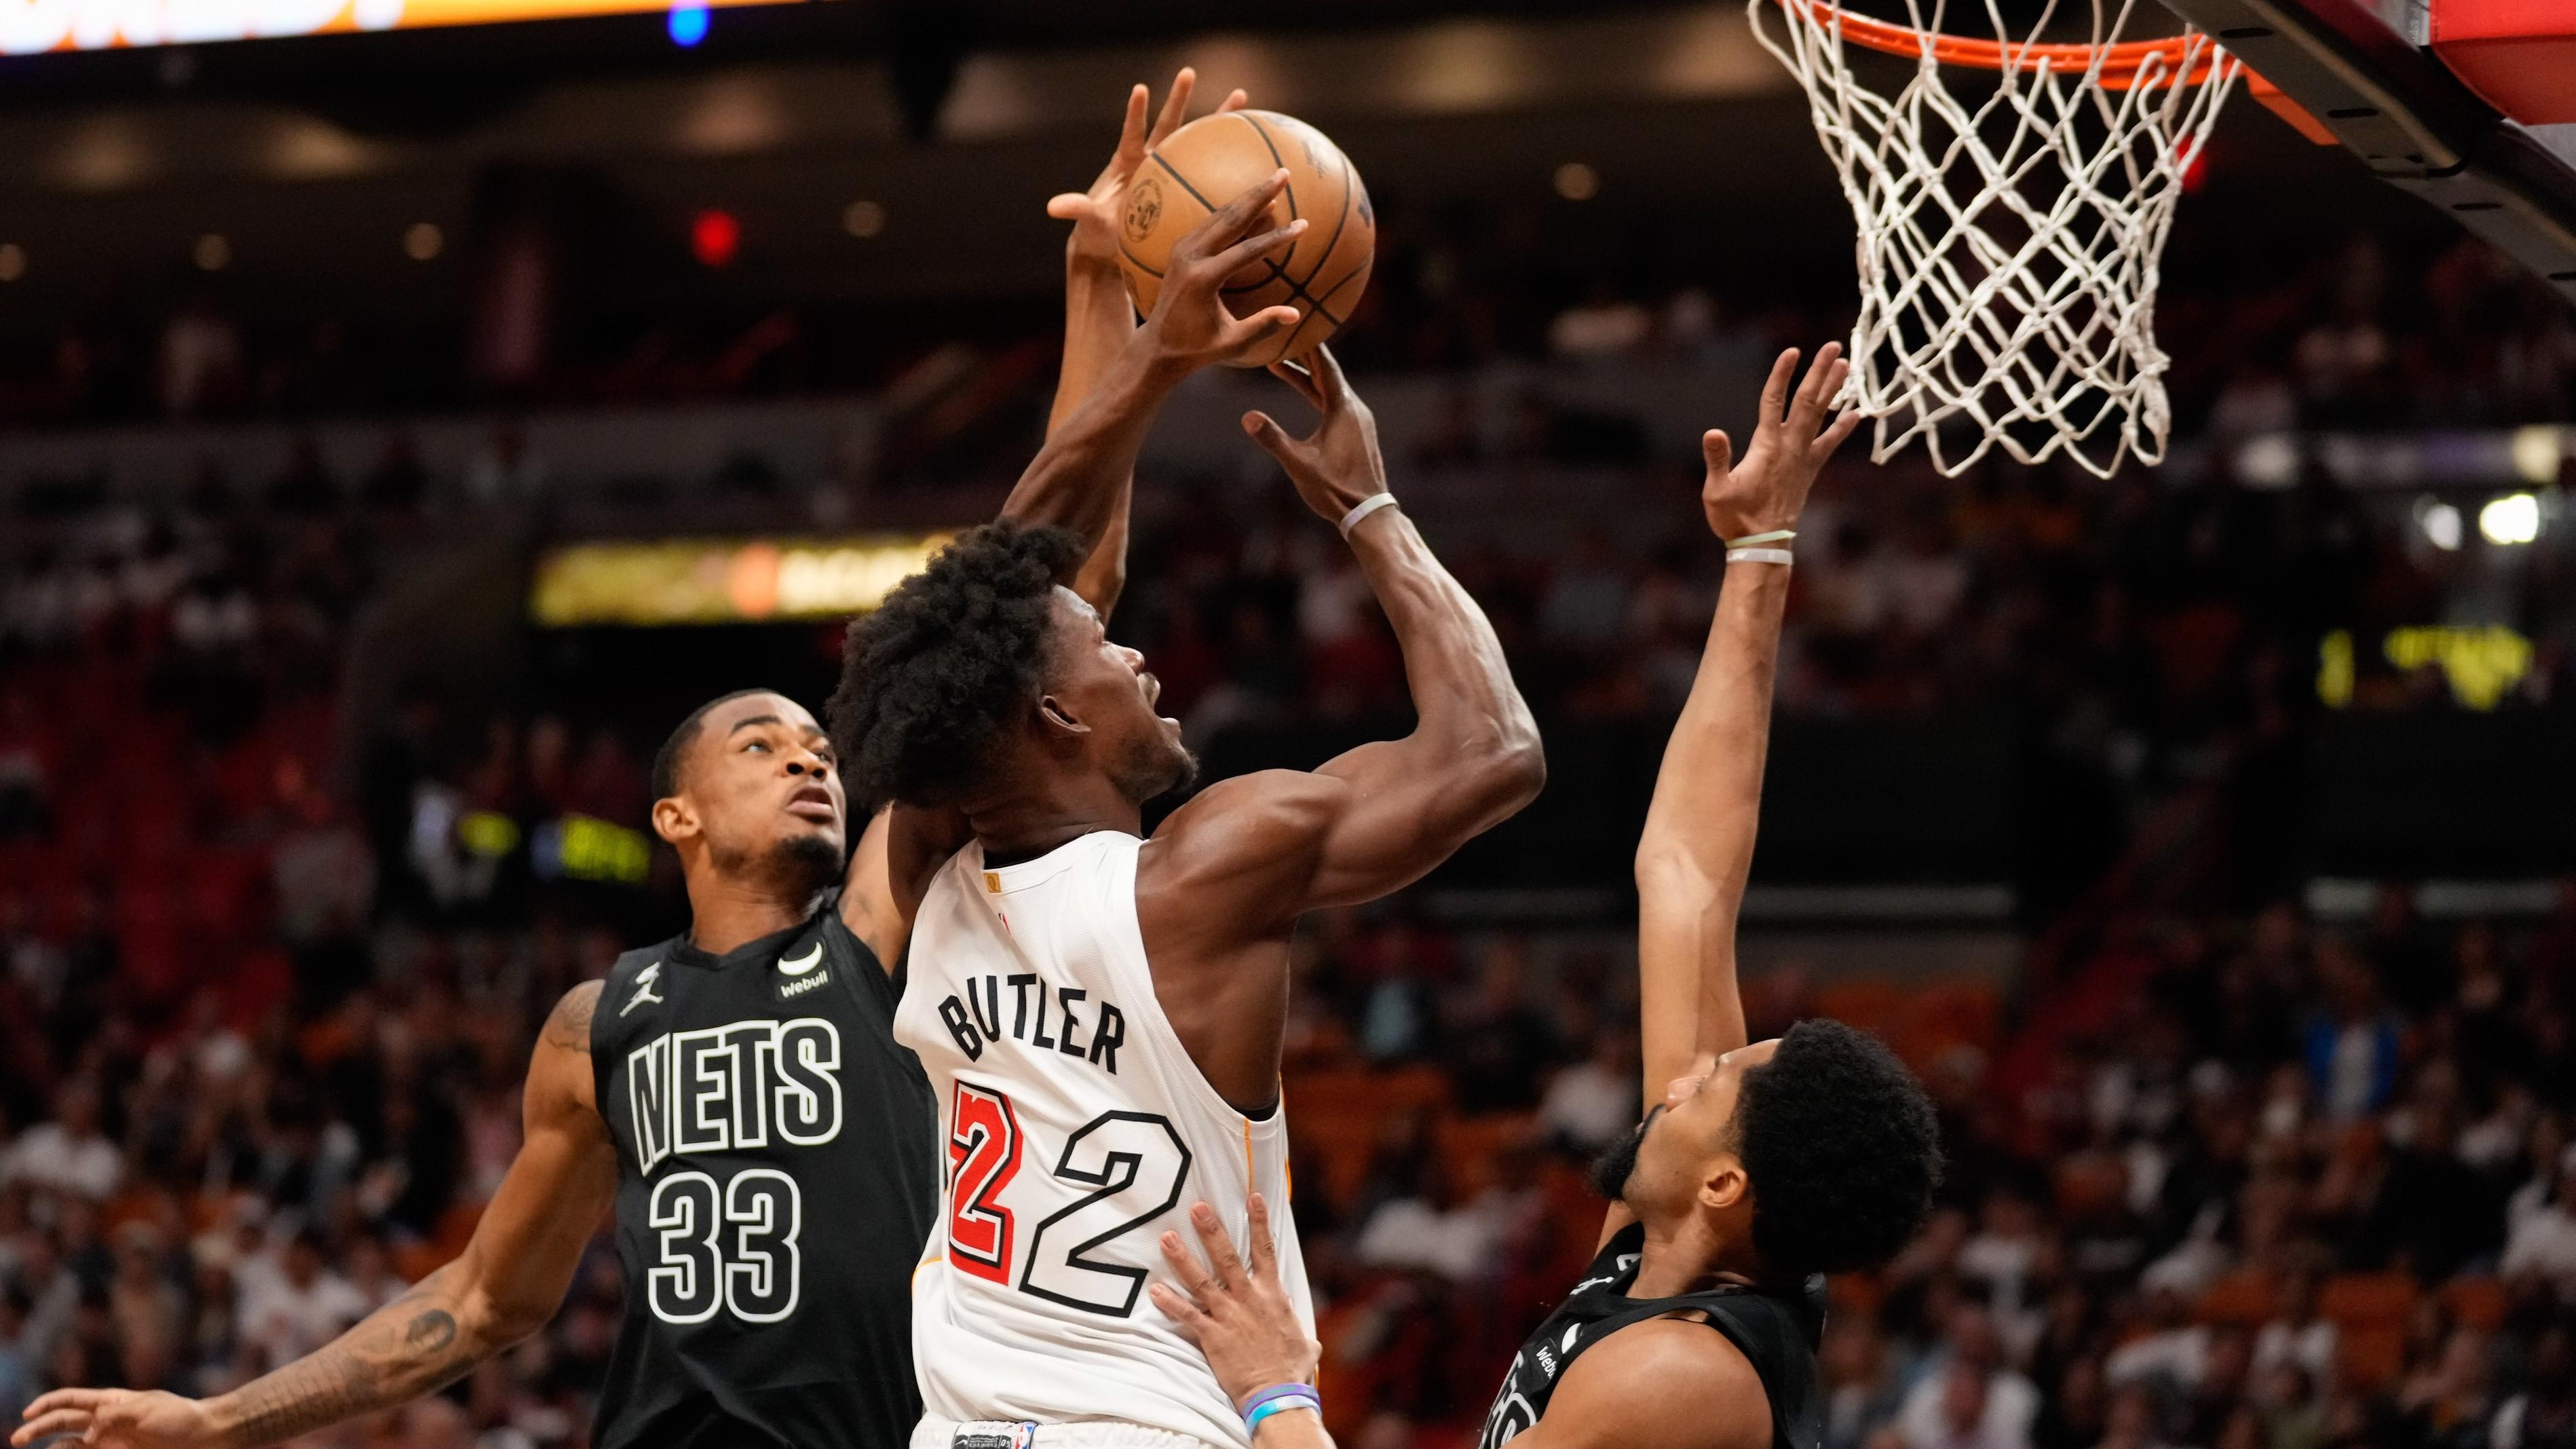 Mar 25, 2023; Miami, Florida, USA; Brooklyn Nets center Nic Claxton (33) fouls Miami Heat forward Jimmy Butler (22) during the first quarter at Miami-Dade Arena. / Rich Storry-USA TODAY Sports